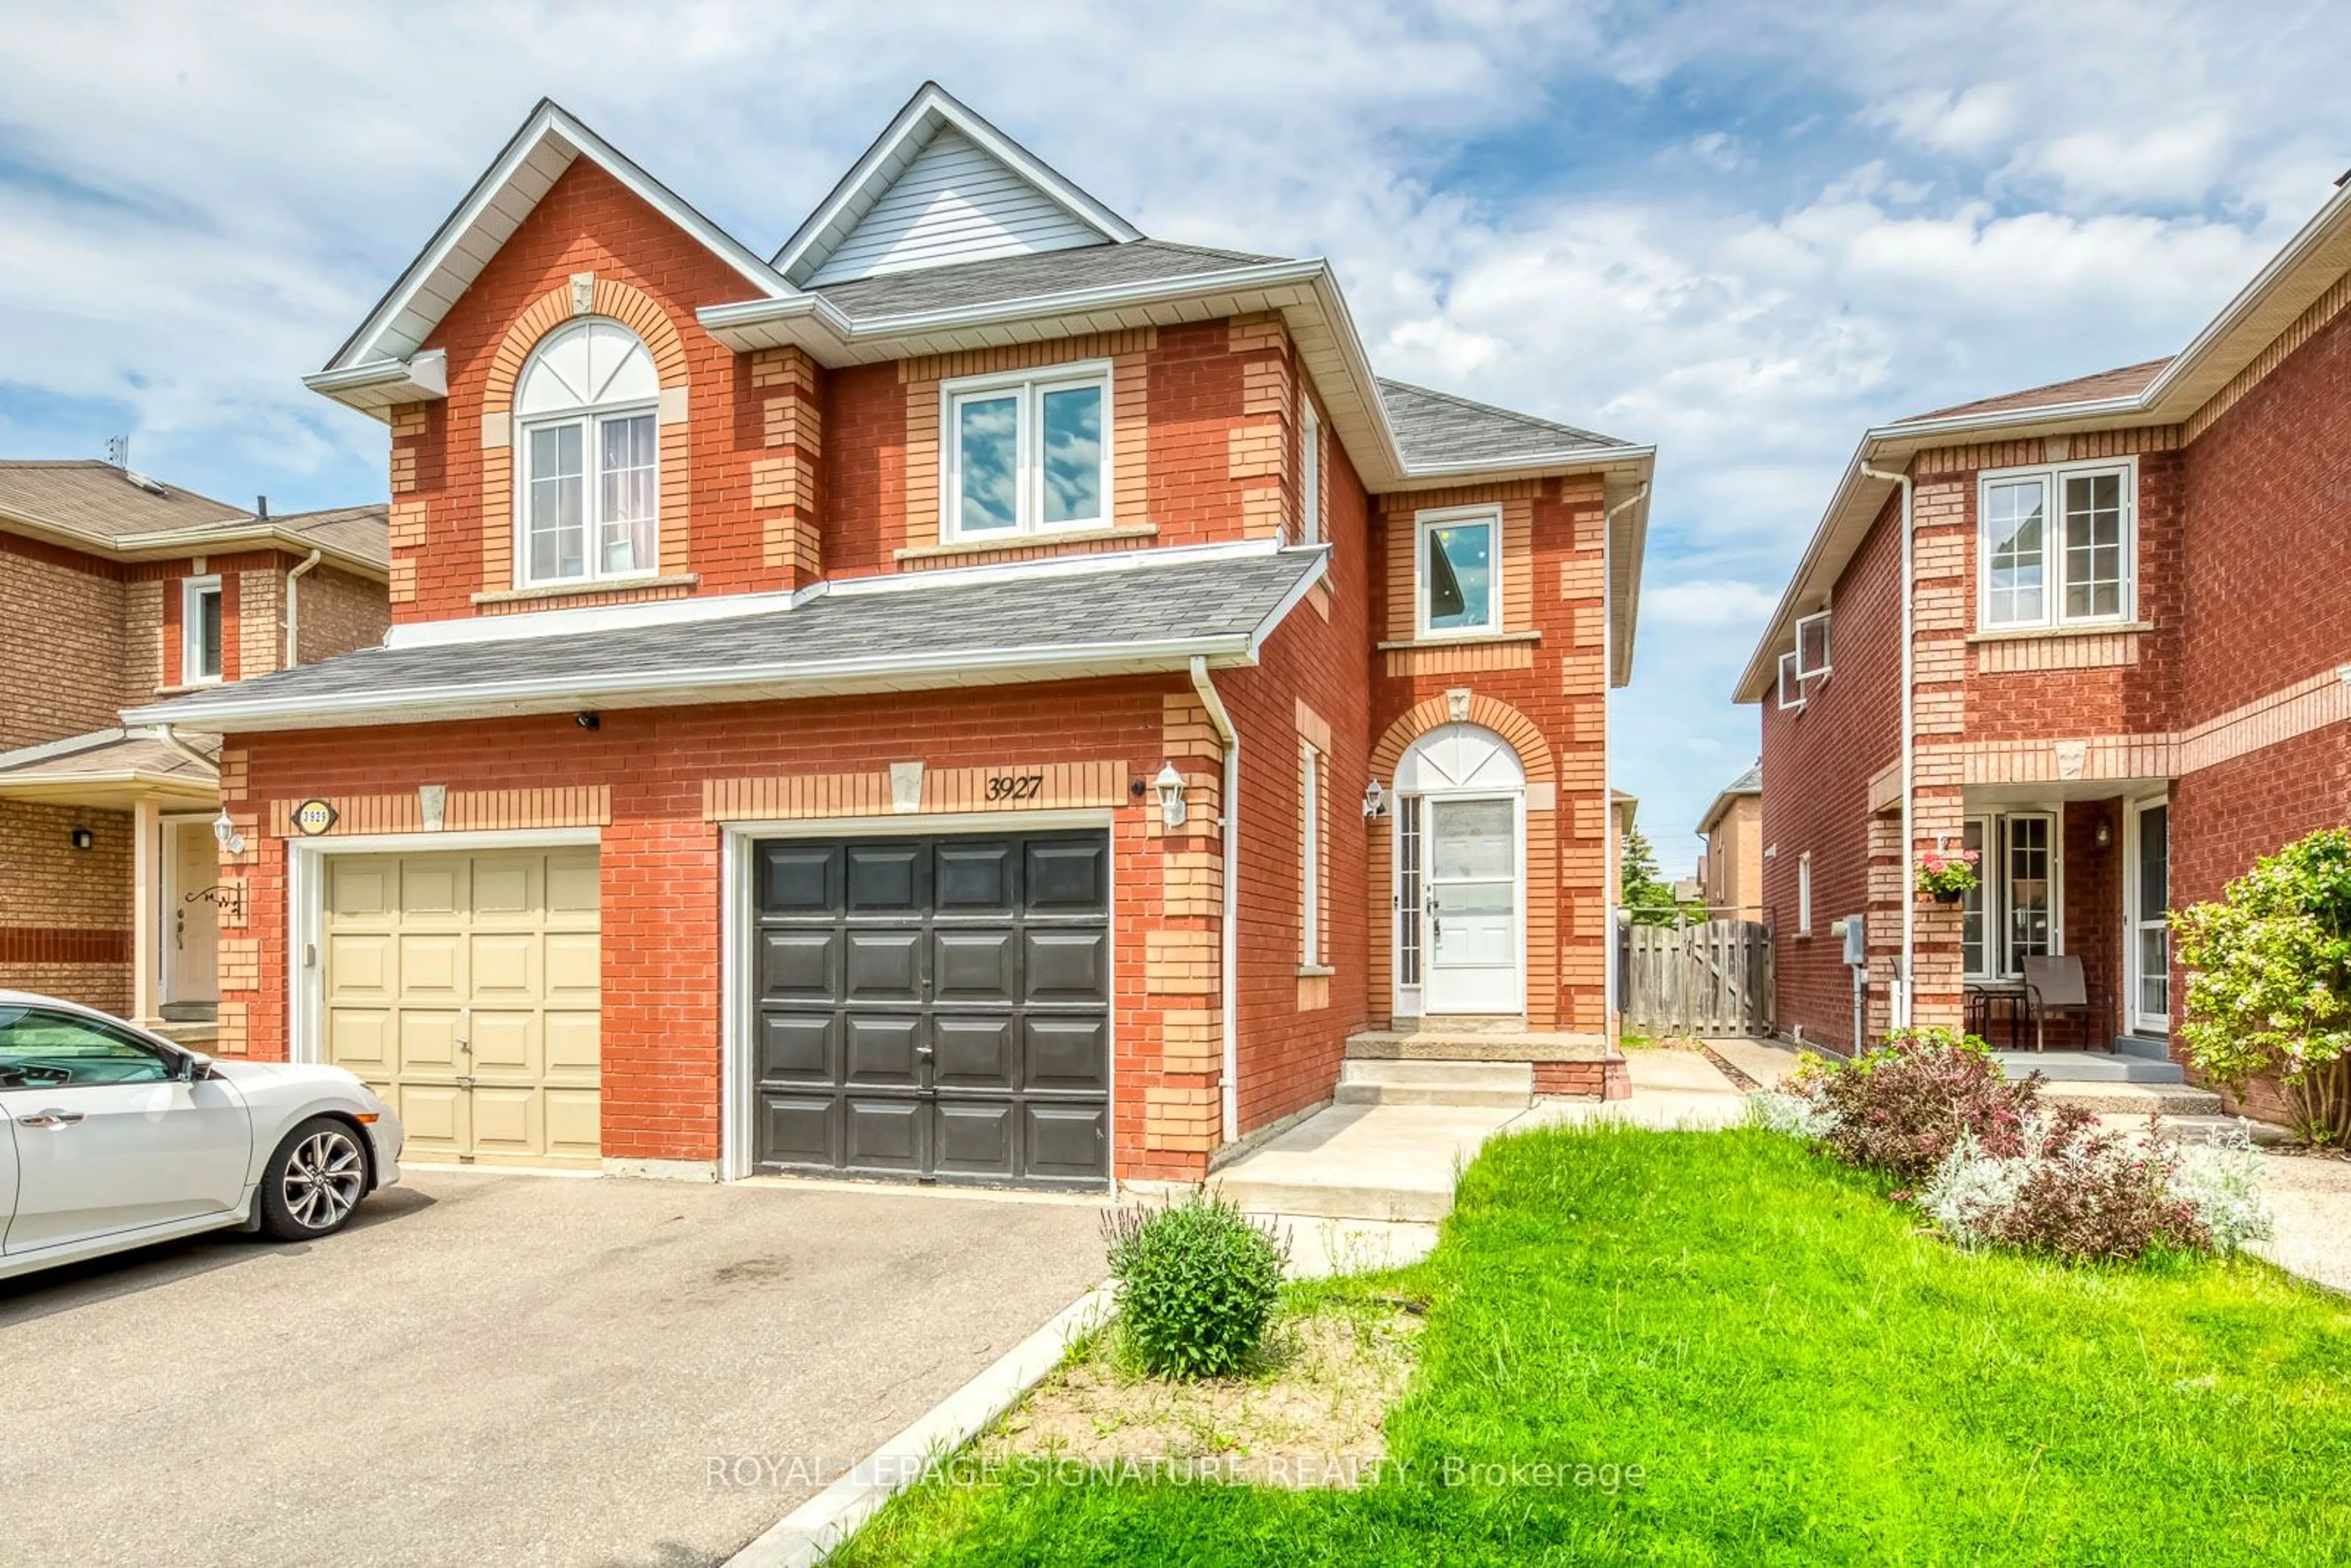 Home with brick exterior material for 3927 Rippleton Lane, Mississauga Ontario L5N 6Z8